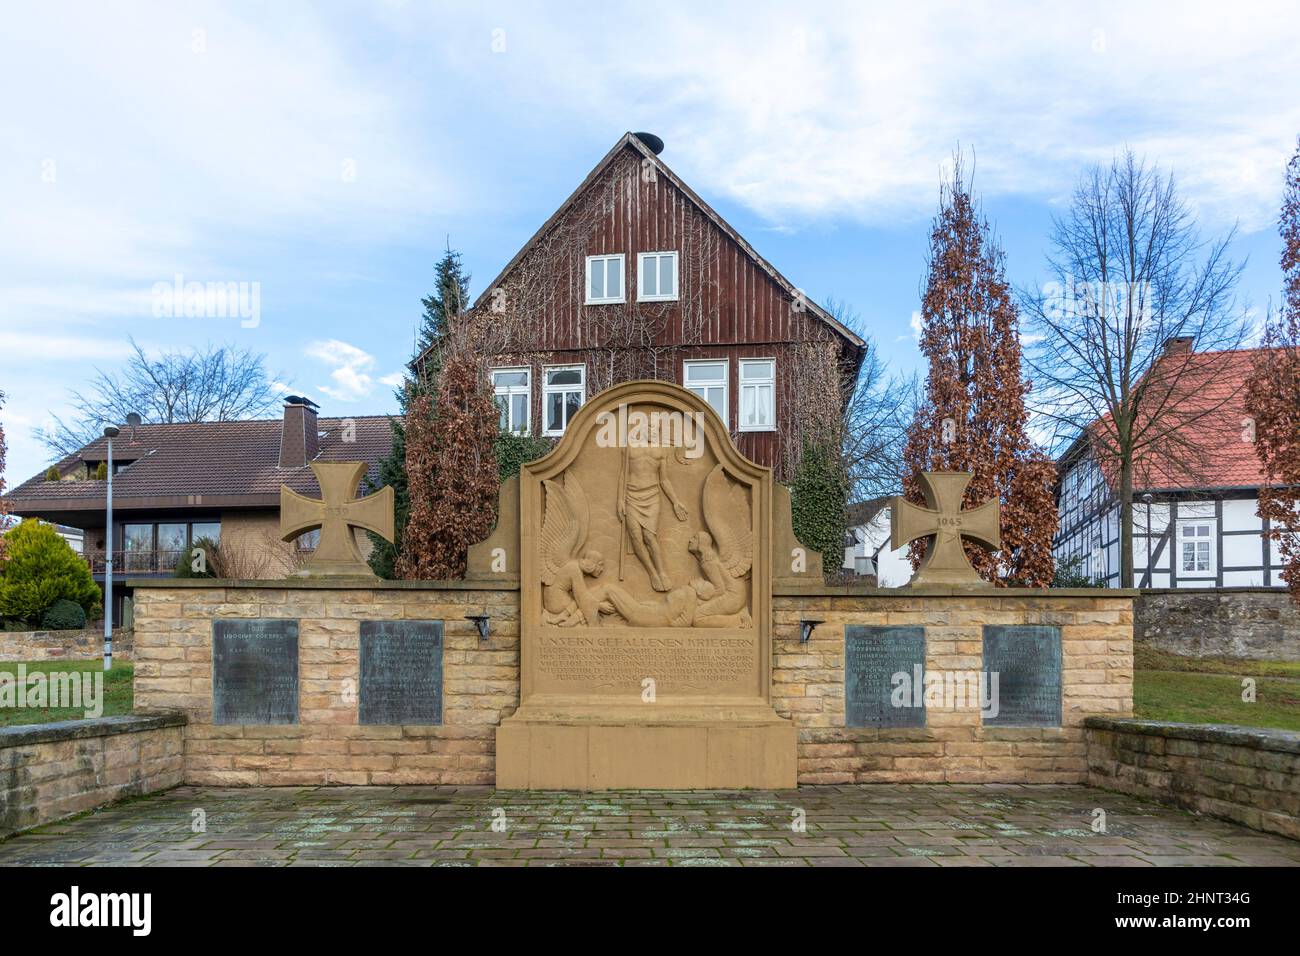 monument for the fallen soldiers in WW1 in Bad Driburg Stock Photo